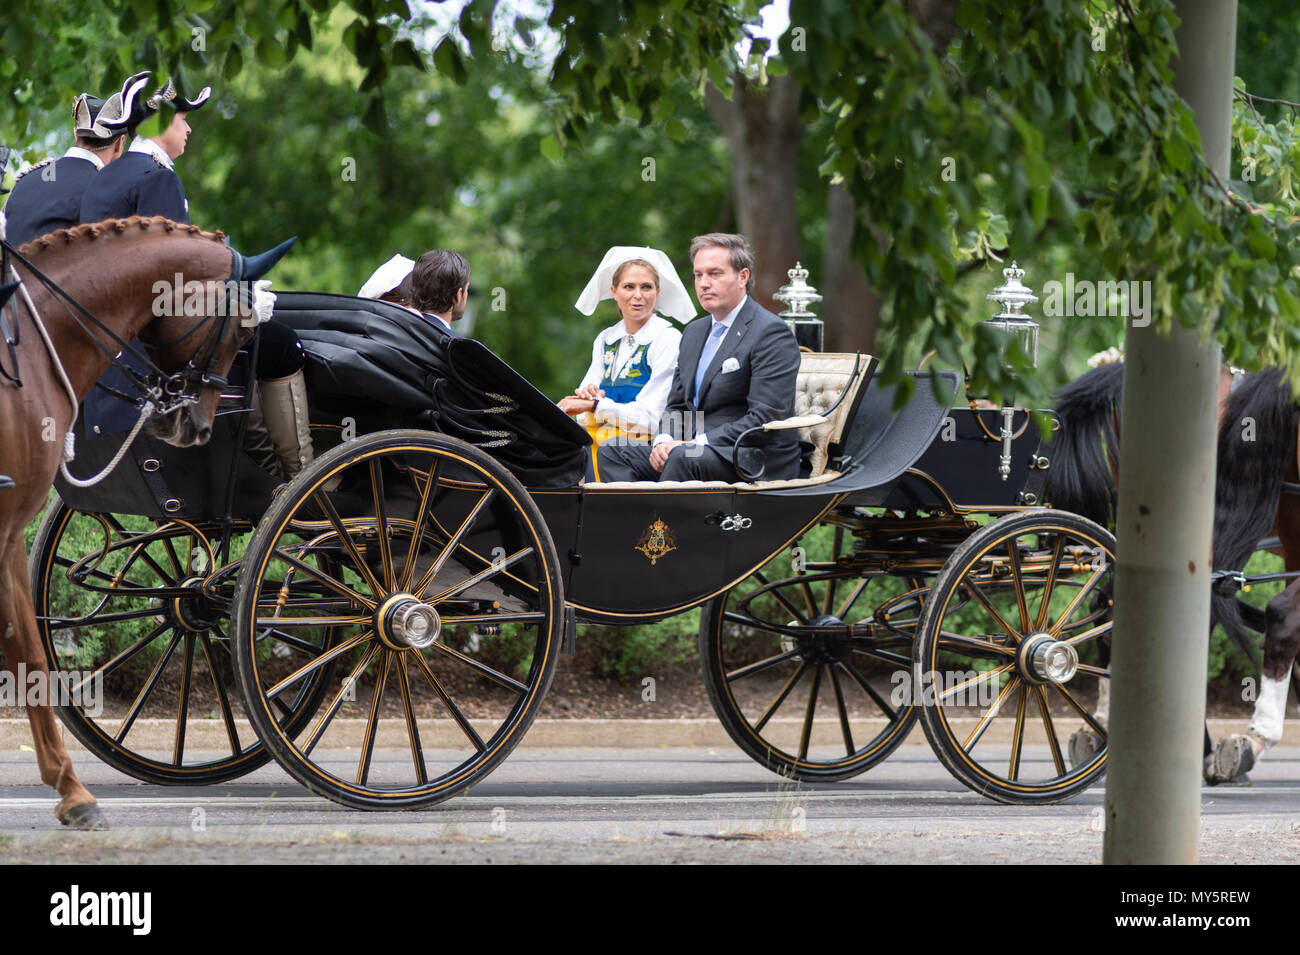 Stockholm, Sweden, June 6, 2018. The Swedish Royal Family celebrating the Swedish National Day in Stockholm. Princess Madeleine and Mr Christopher O´Neill Credit: Barbro Bergfeldt/Alamy Live News Stock Photo